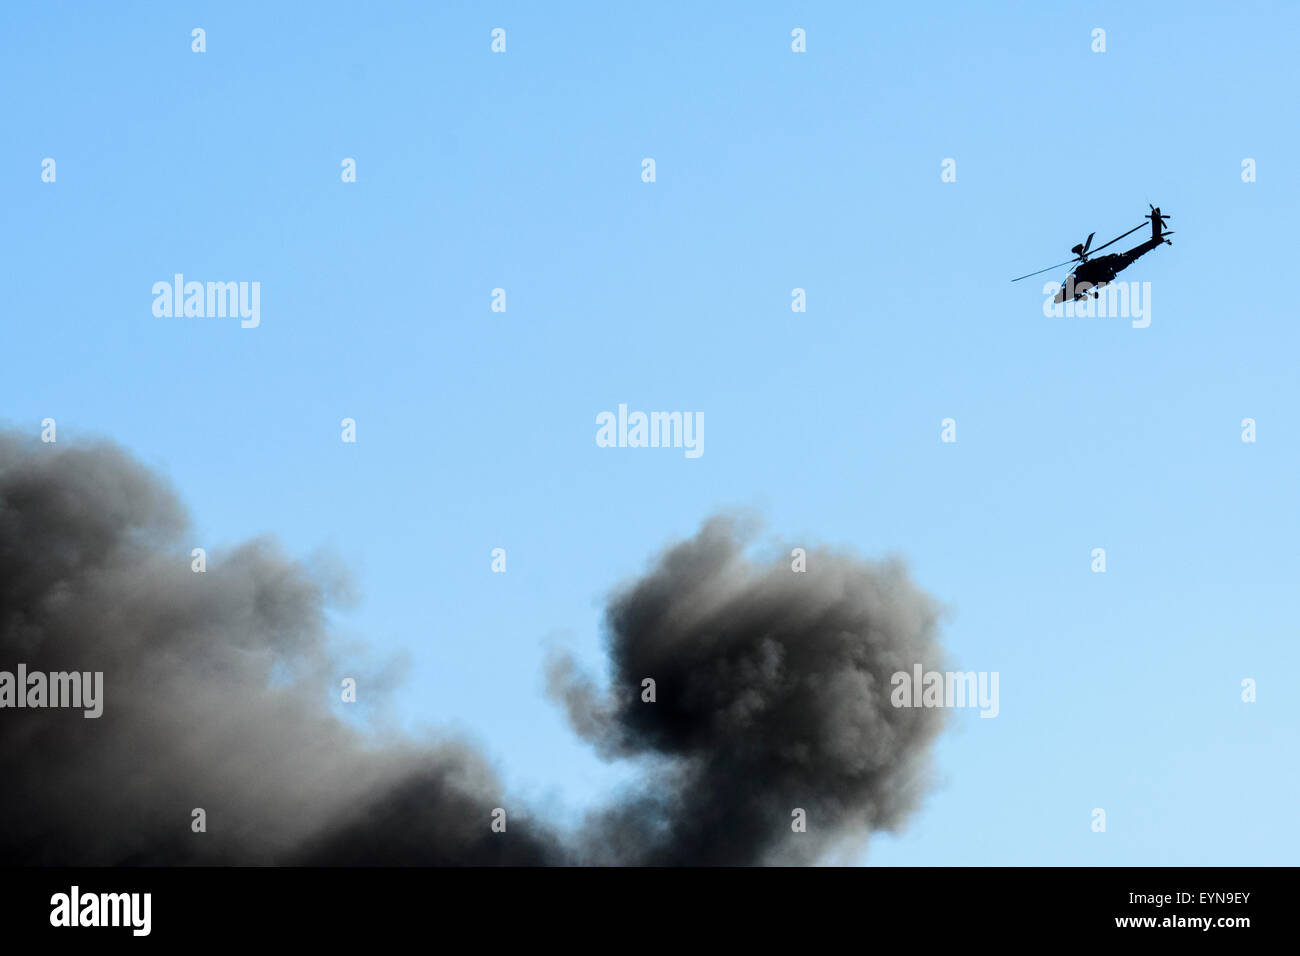 Army Air Corps Apache AH1 attack helicopter and black smoke seen during a forces role demonstration Stock Photo